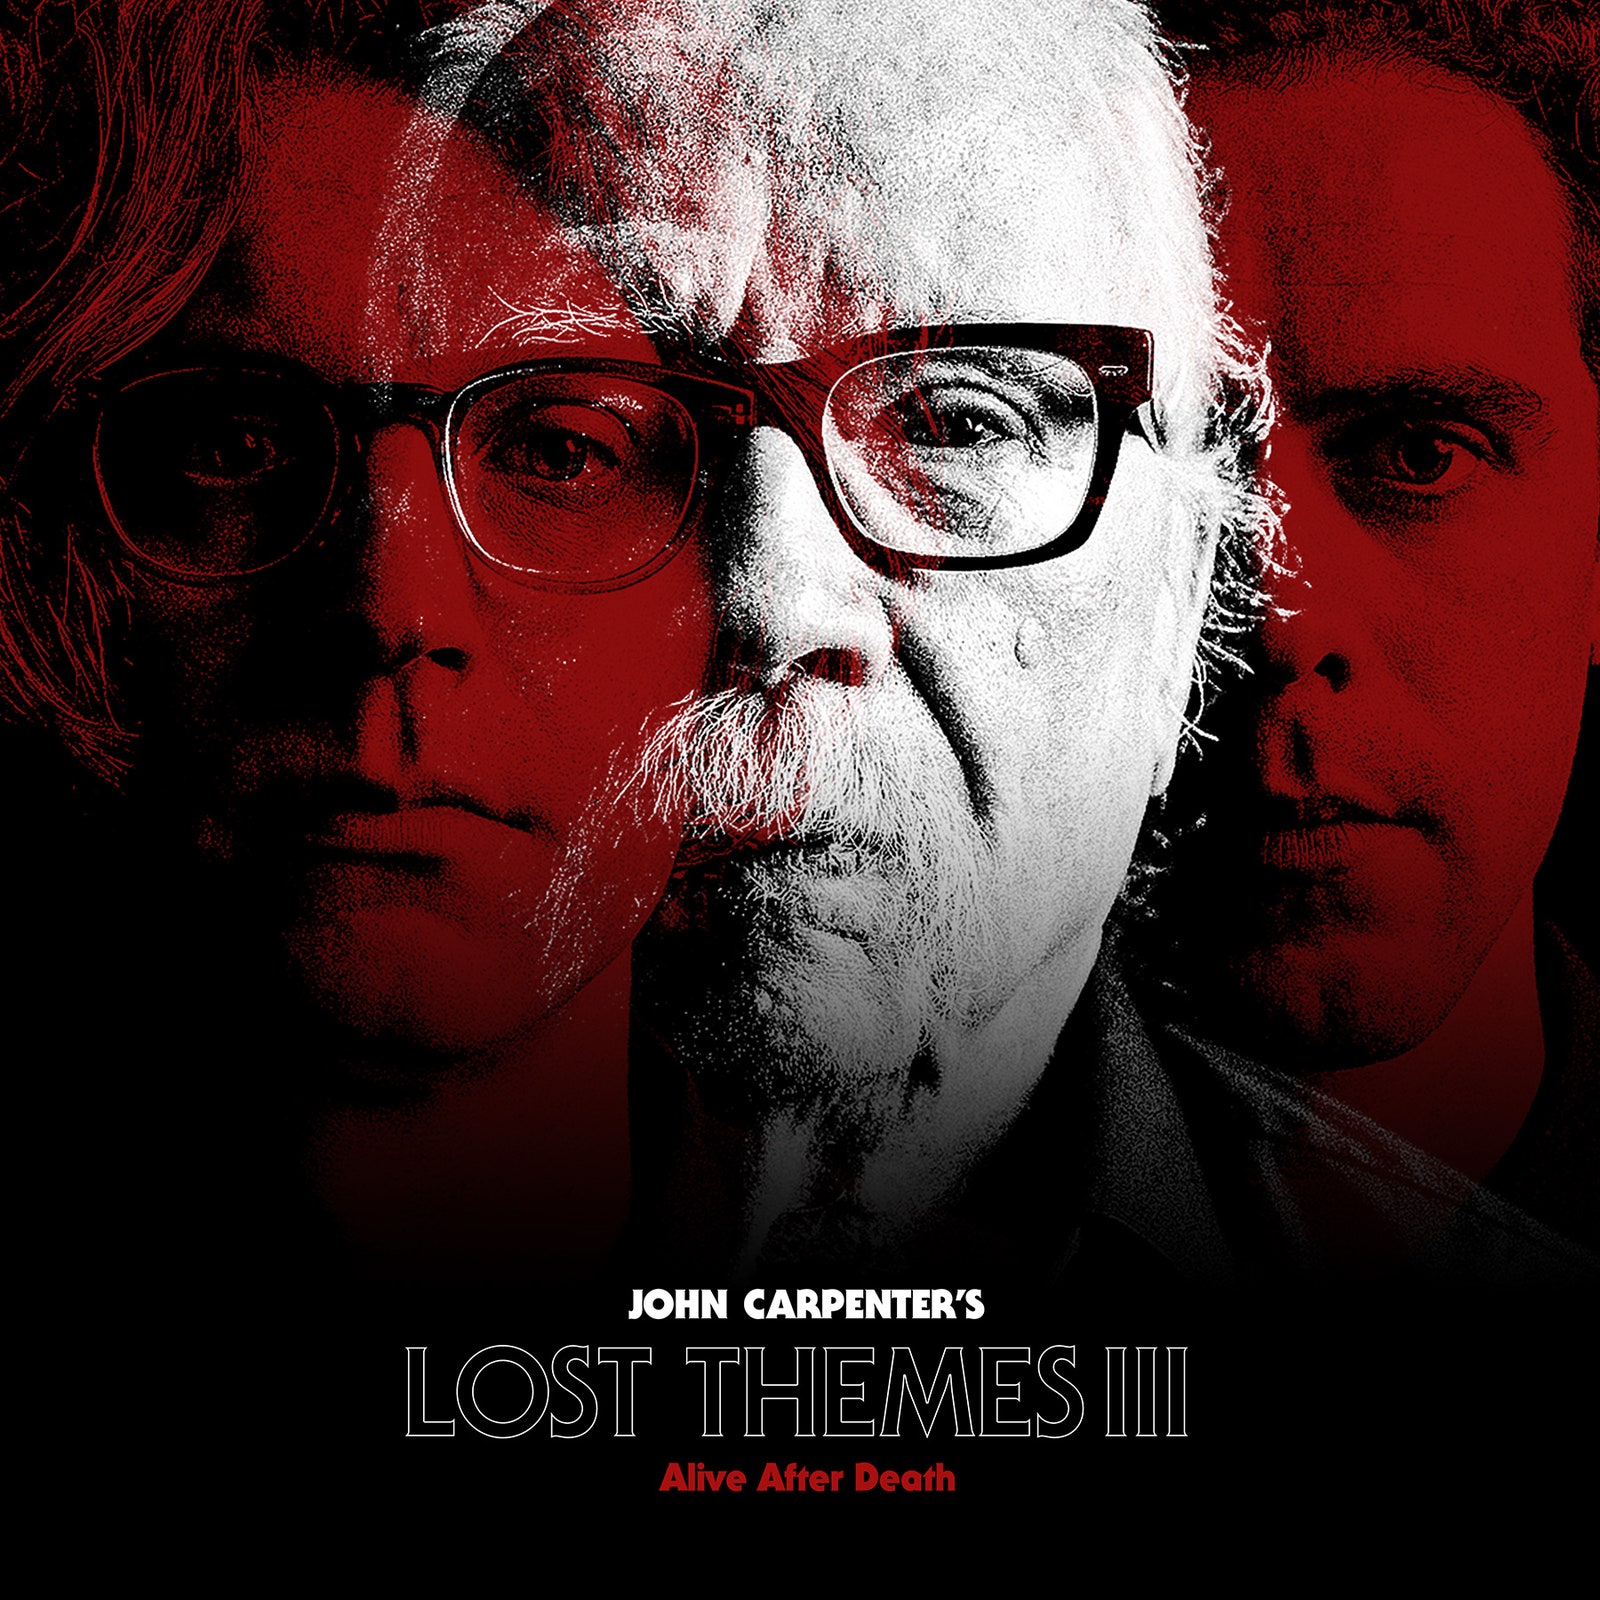 John Carpenter's "Lost Themes III: Alive After Death" LP